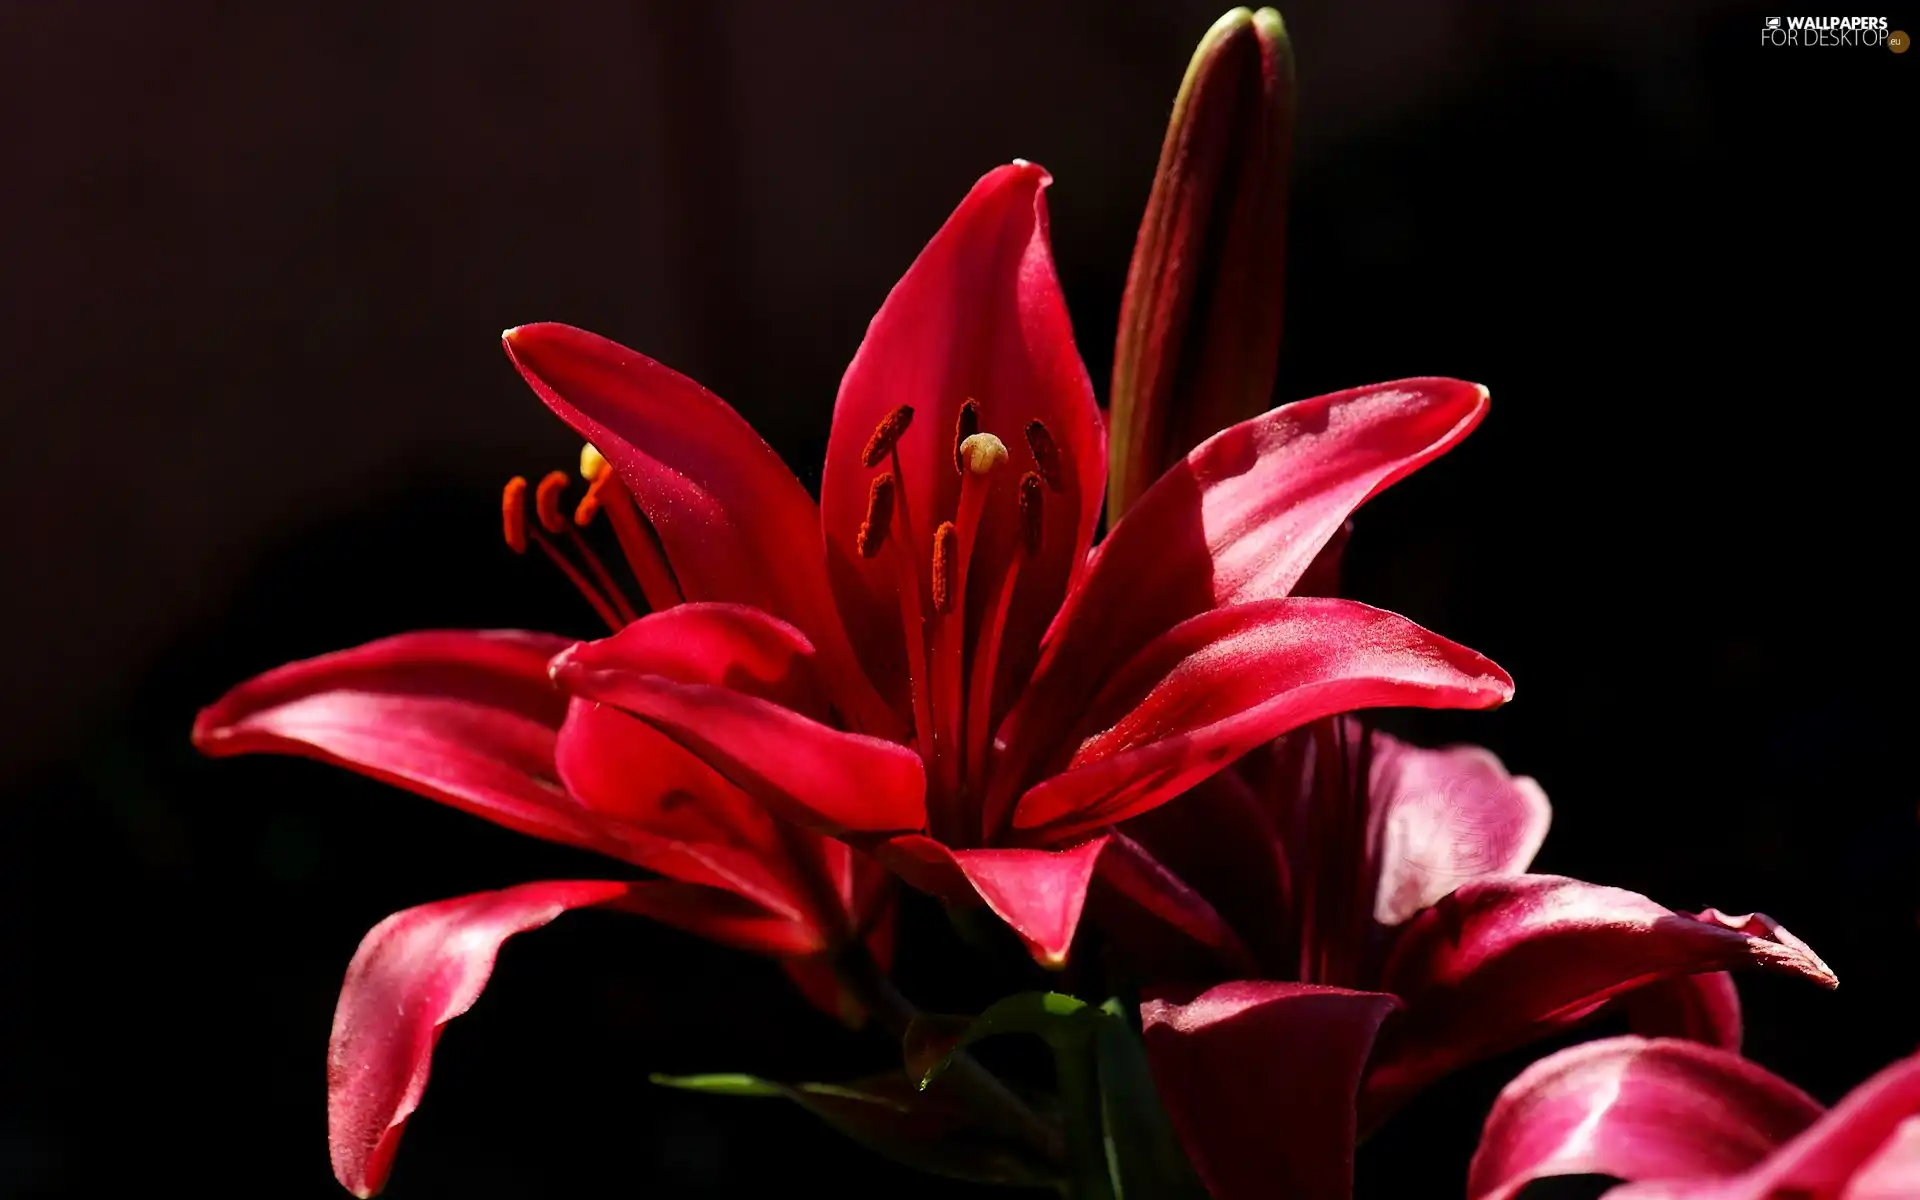 red hot, Black, background, Lily